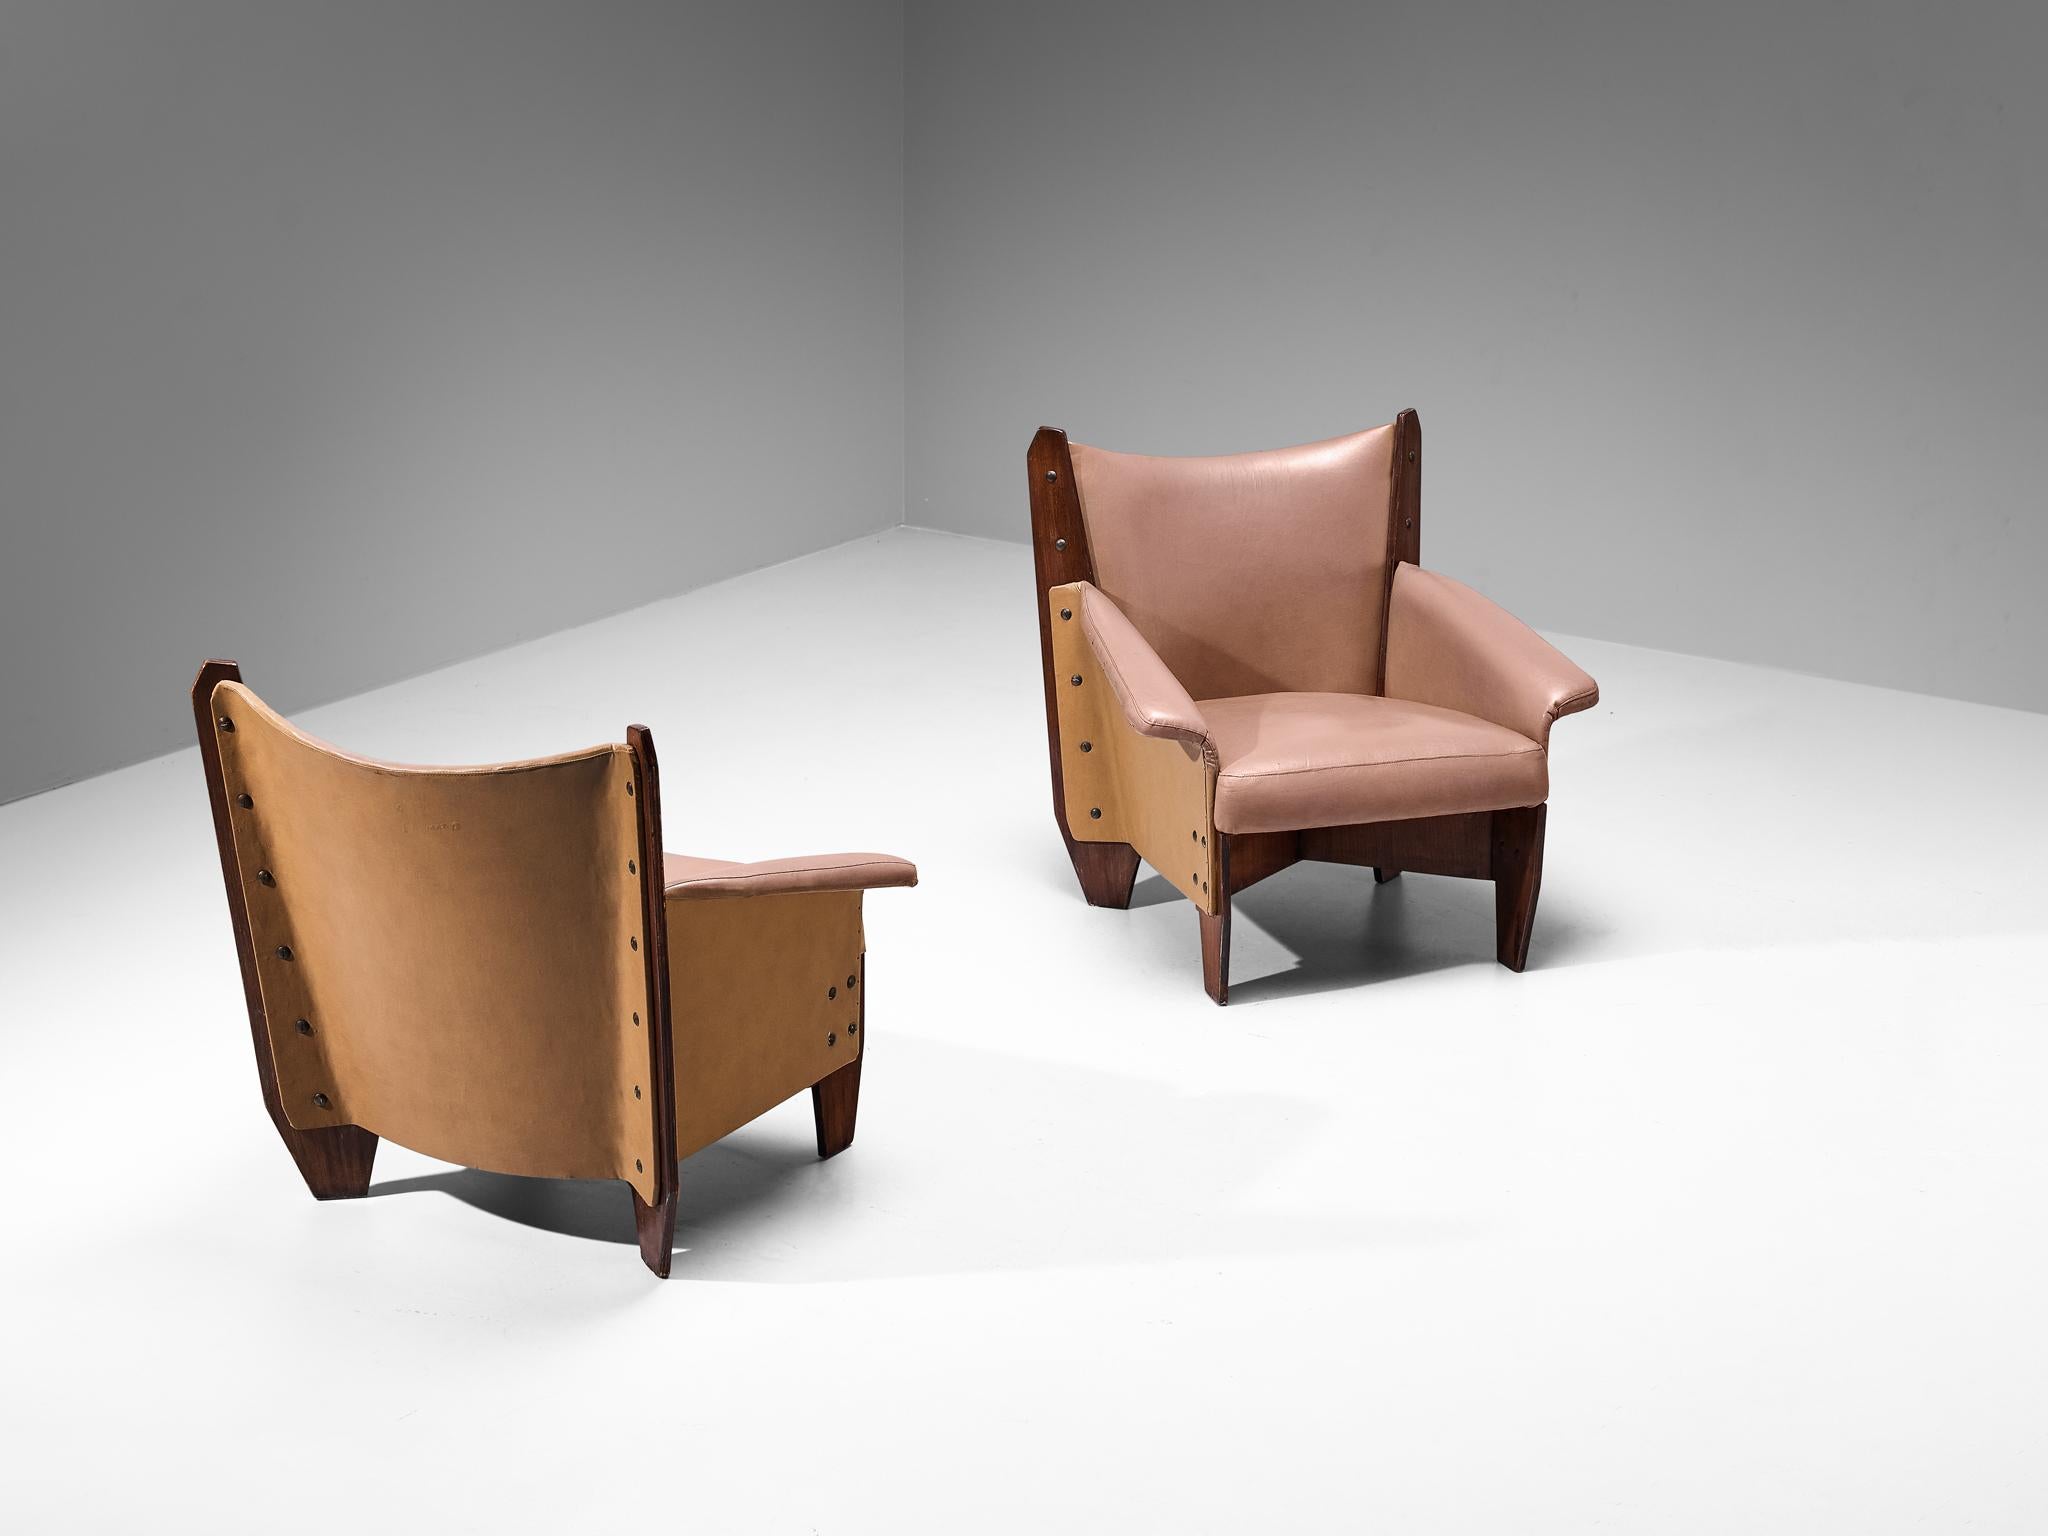 Pair of armchairs, mahogany plywood, faux leather, metal, Italy, 1950s

These easy chairs embody an exquisite form made possible by the inherent quality of the plywood, resulting in sharp, sleek lines and solid geometry. The crescent-shaped